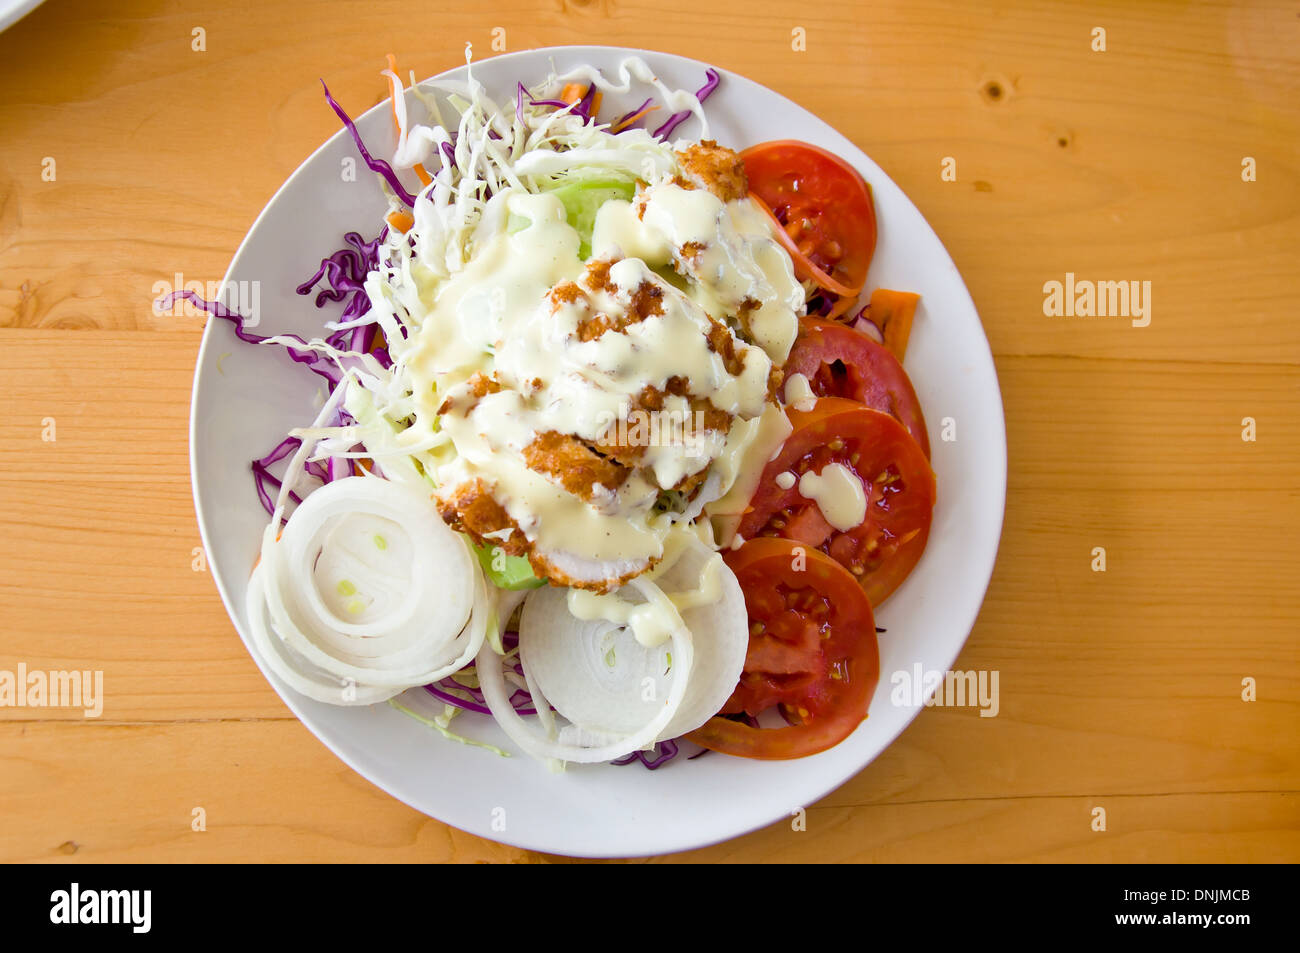 fish salad and vegetable for healthy food Stock Photo